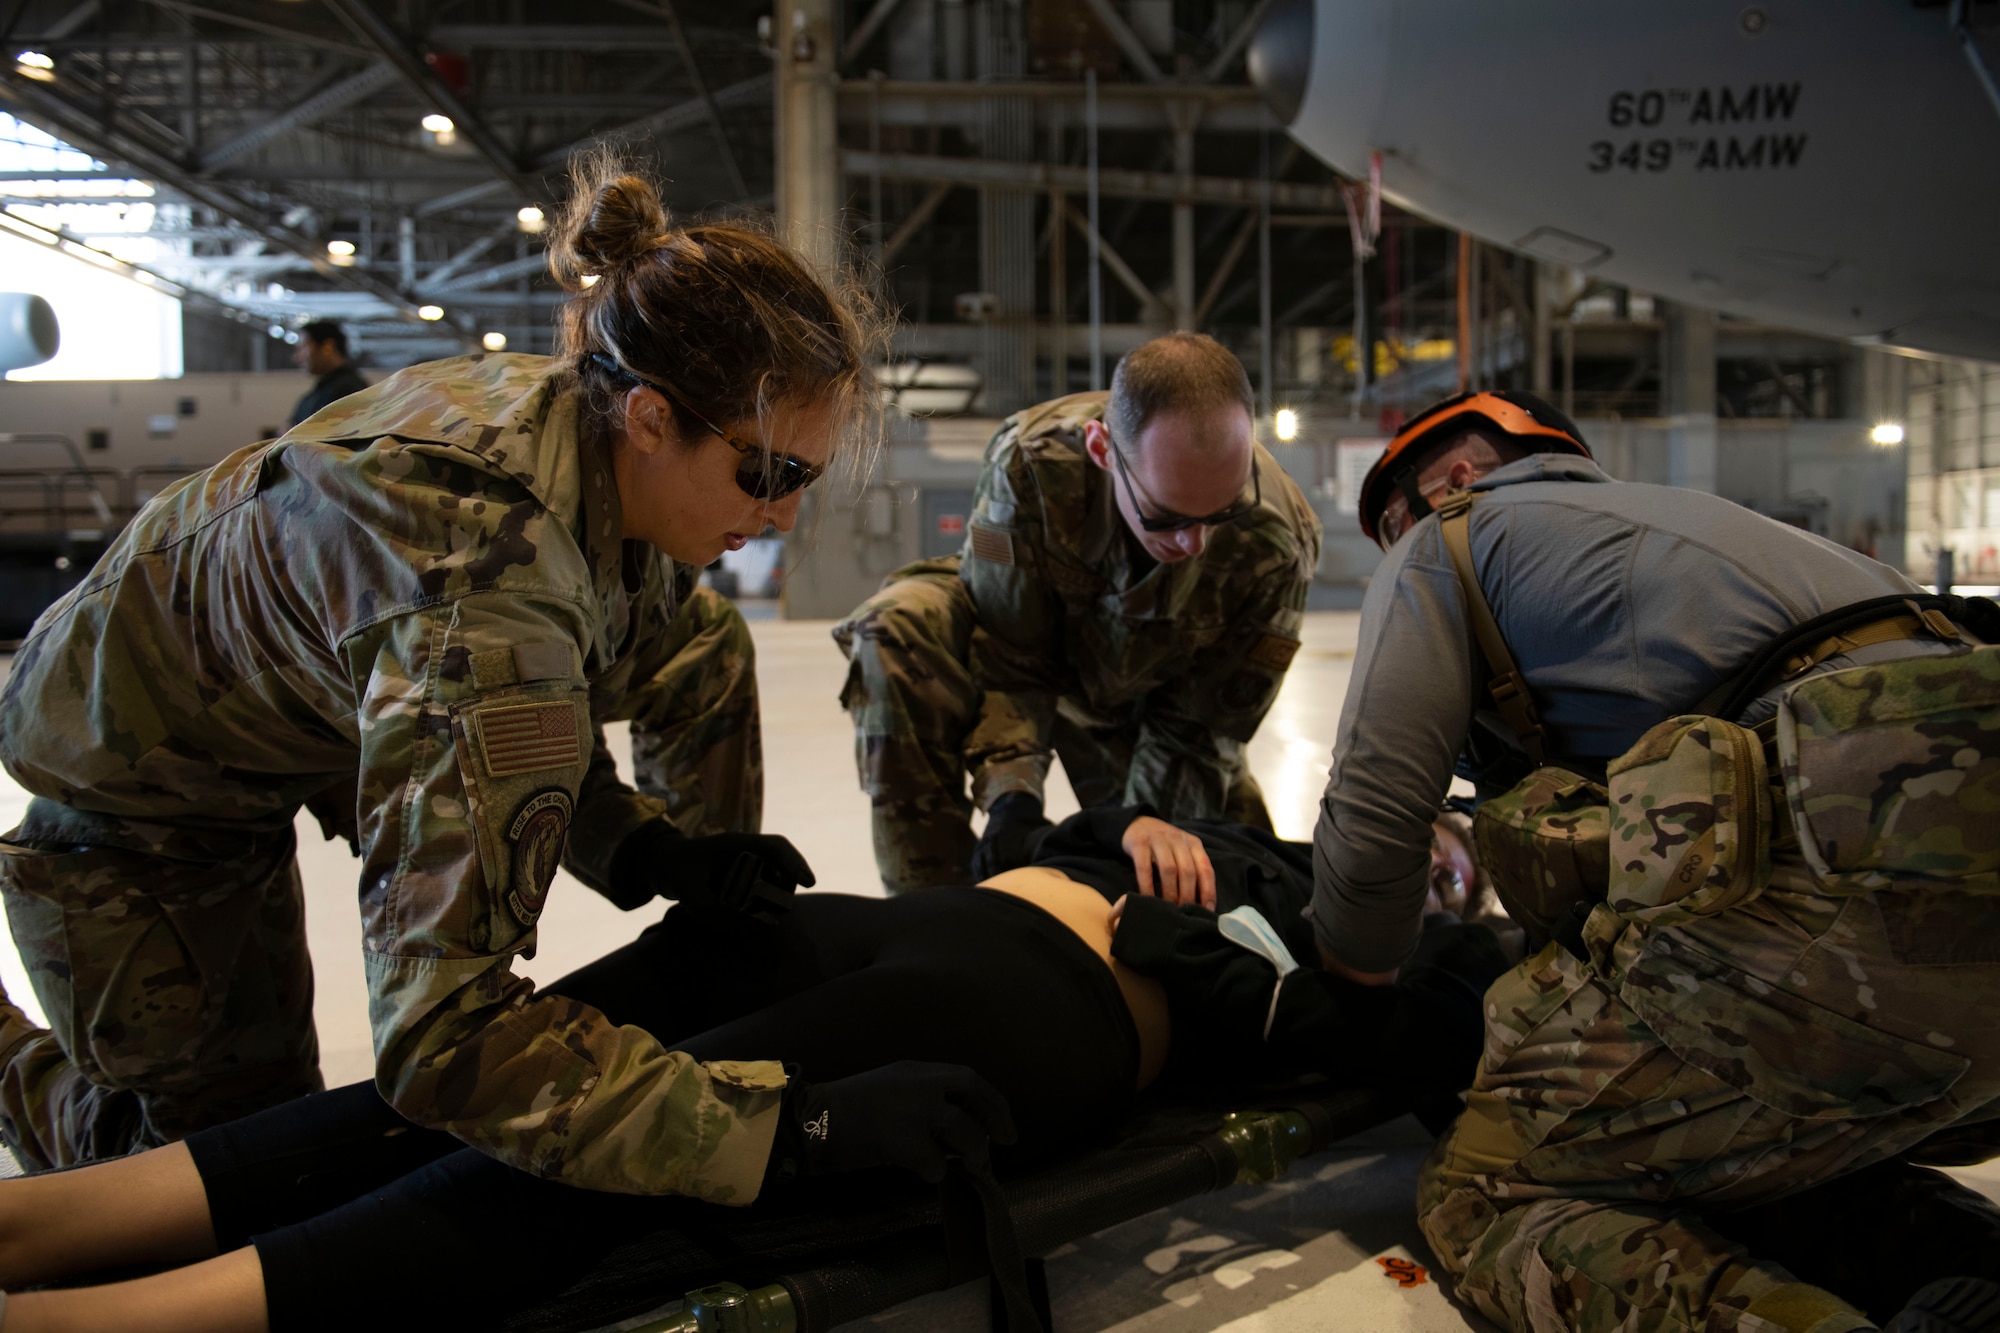 Airmen conduct simulated medical procedures on a simulated patient.